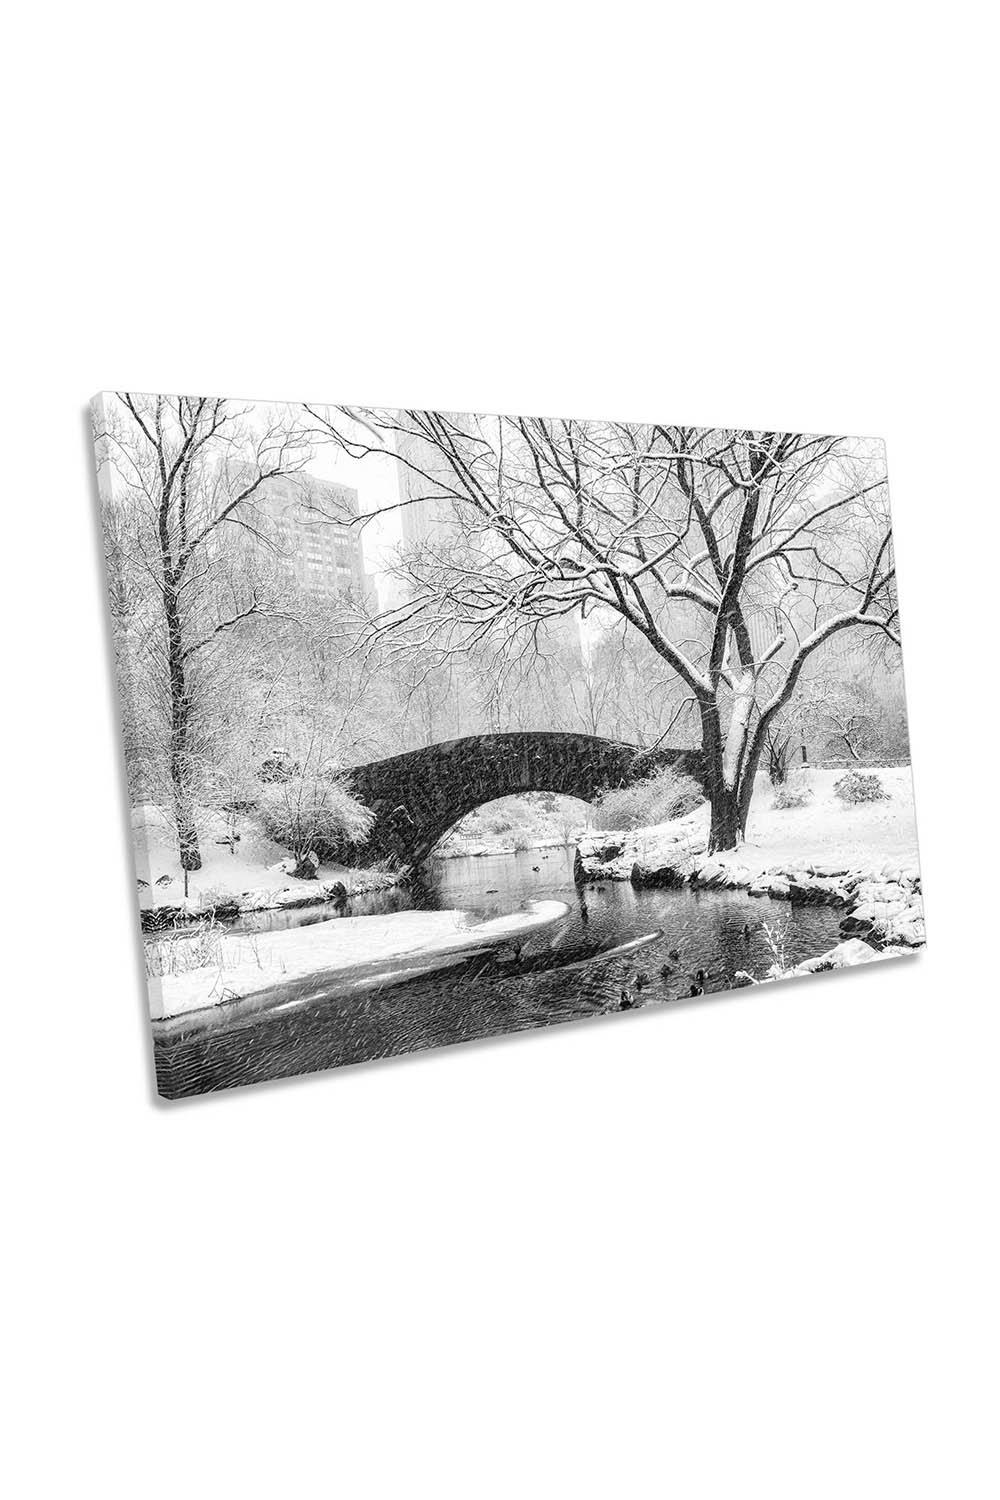 Central Park New York City Winter Canvas Wall Art Picture Print